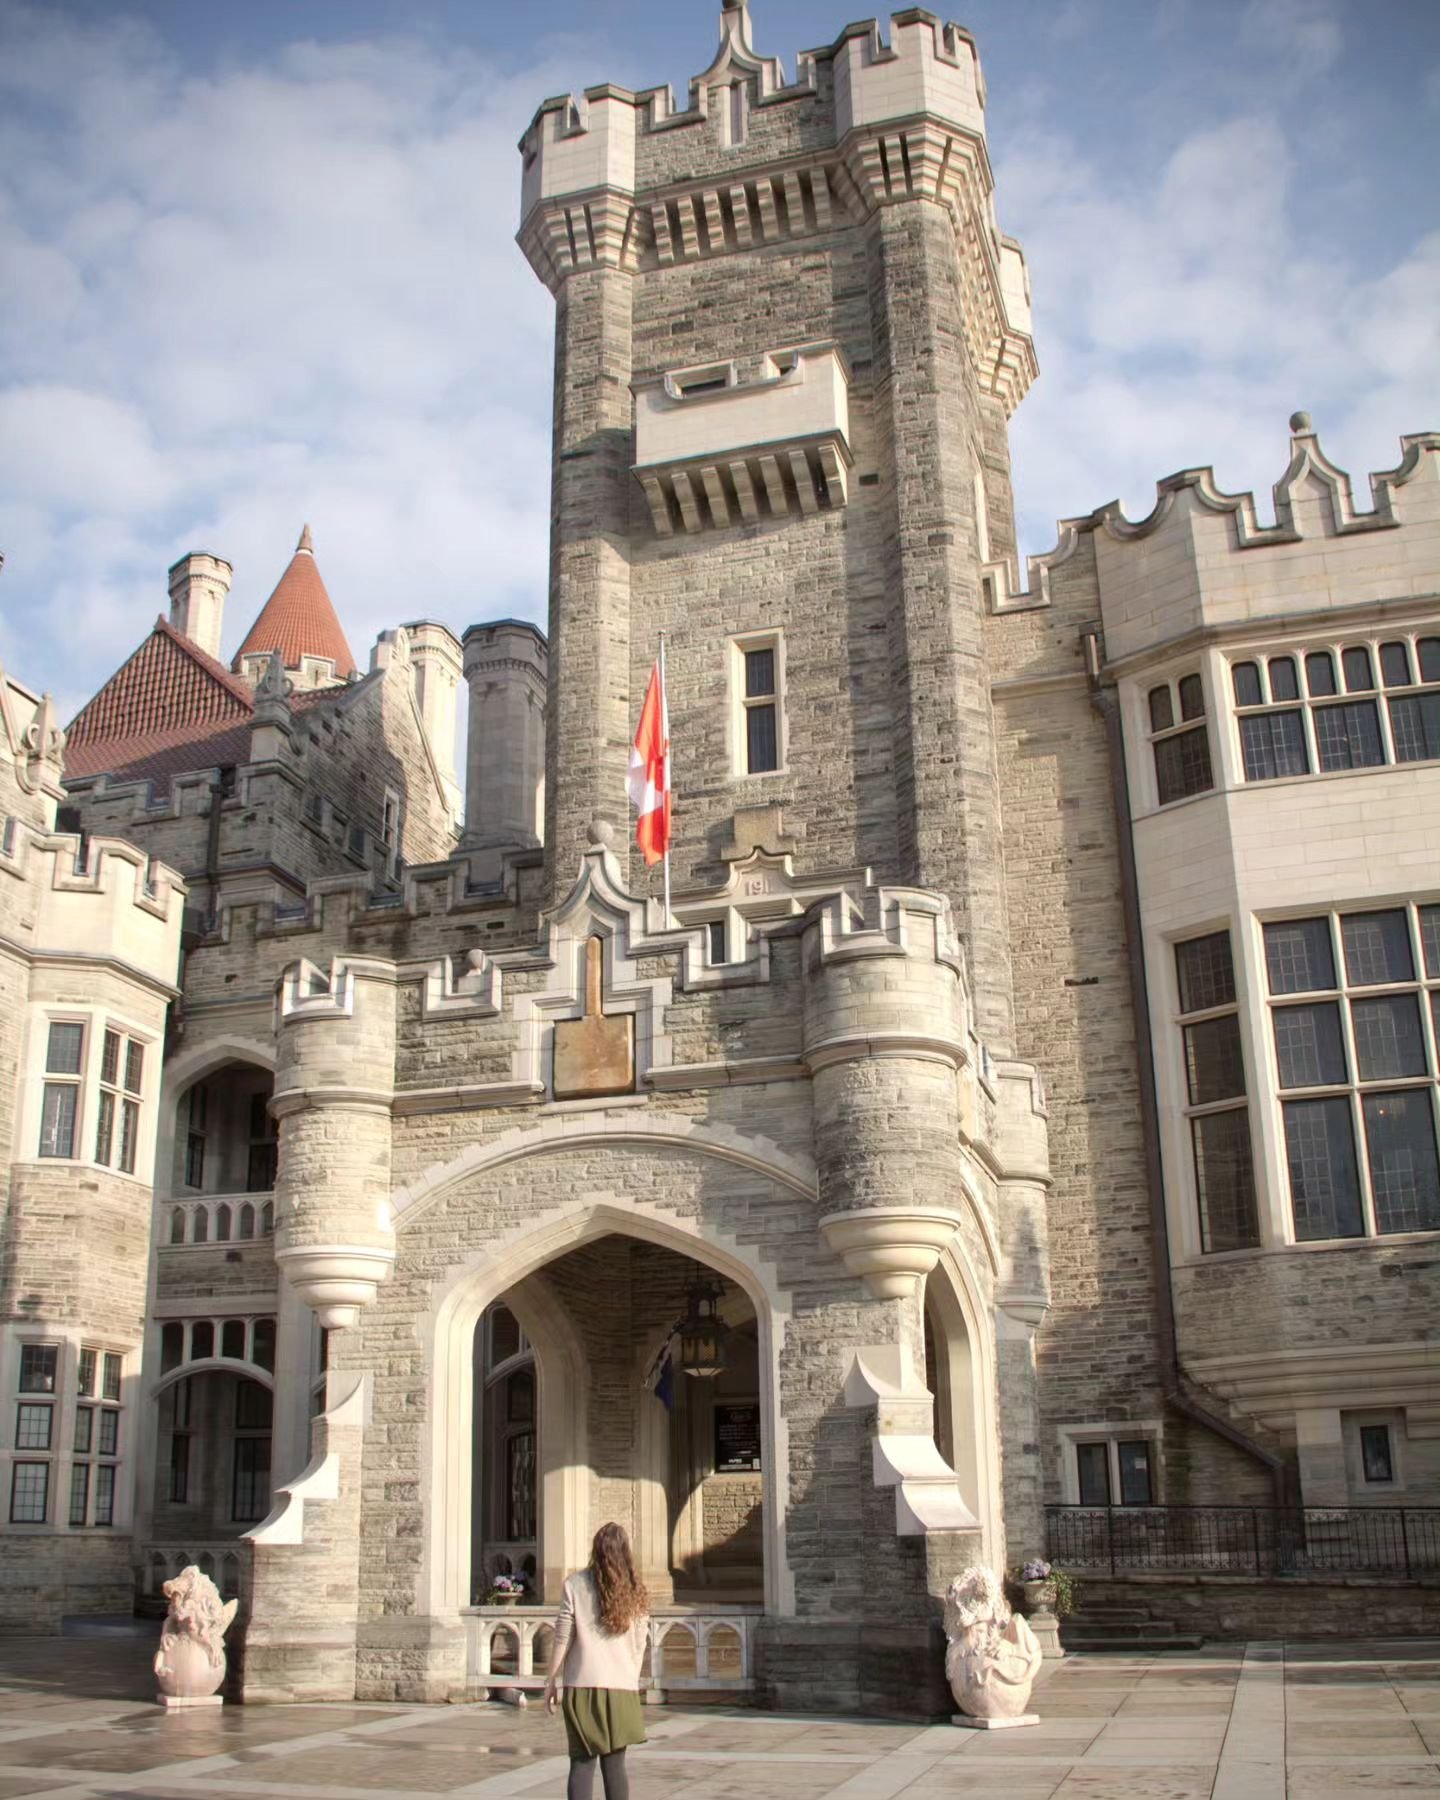 You know I love visiting castles, especially when they are within driving distance! 🏰

And especially especially when they have escape rooms inside them!!!

We went to #toronto over the weekend to do an escape room at Casa Loma, Toronto's Castle on 